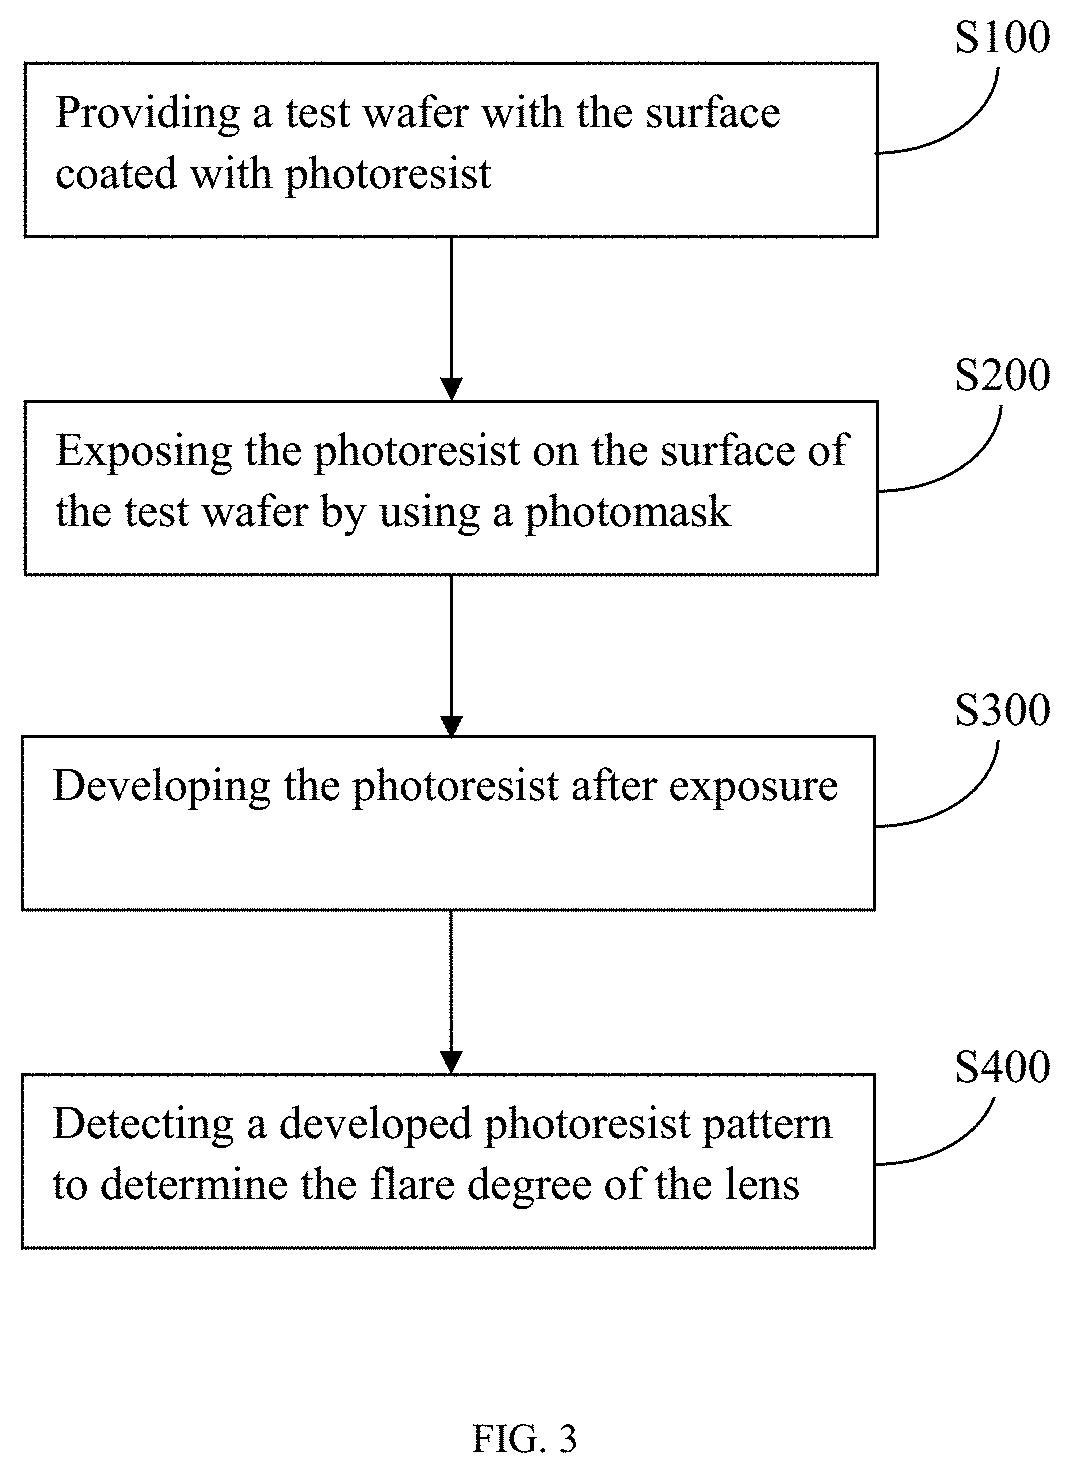 Photomask and Method for Detecting Flare Degree of Lens of Exposure Machine Table